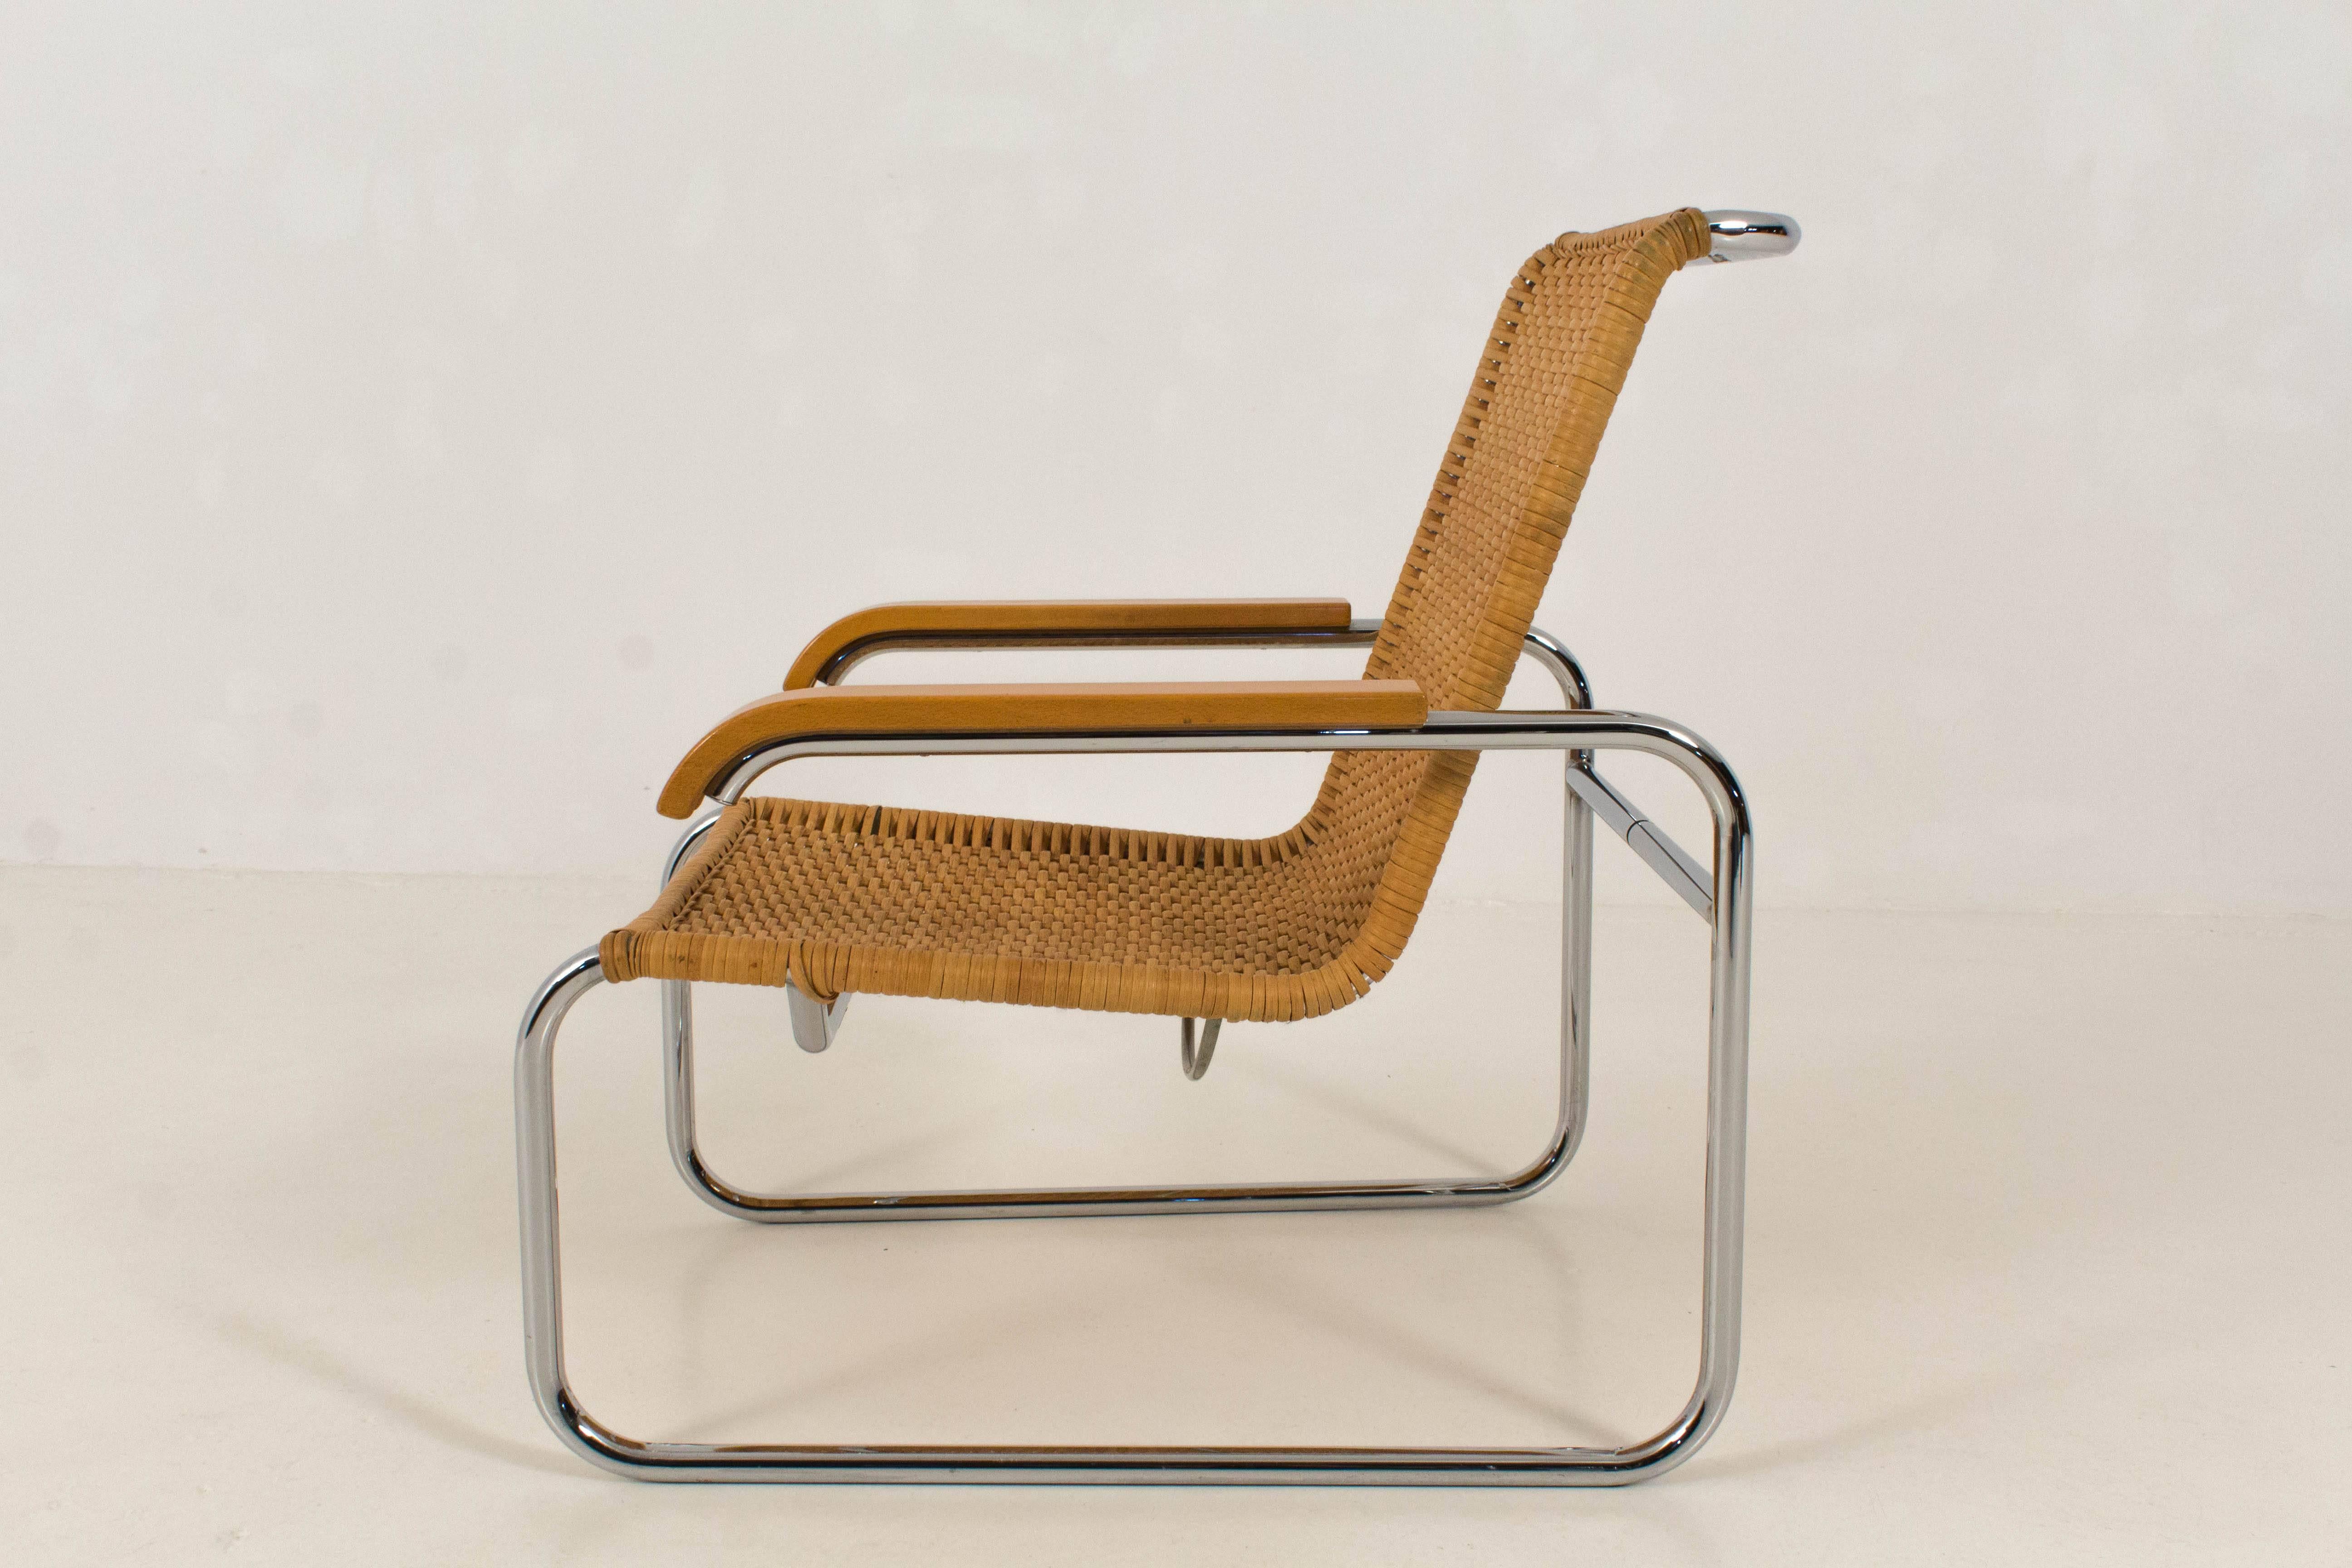 B 35 lounge chair by Marcel Breuer for Thonet, 1970s.
Chromed metal and rattan with wooden armrests.
Re-edition by Thonet 1970s and marked with Thonet sticker.

In good original condition.